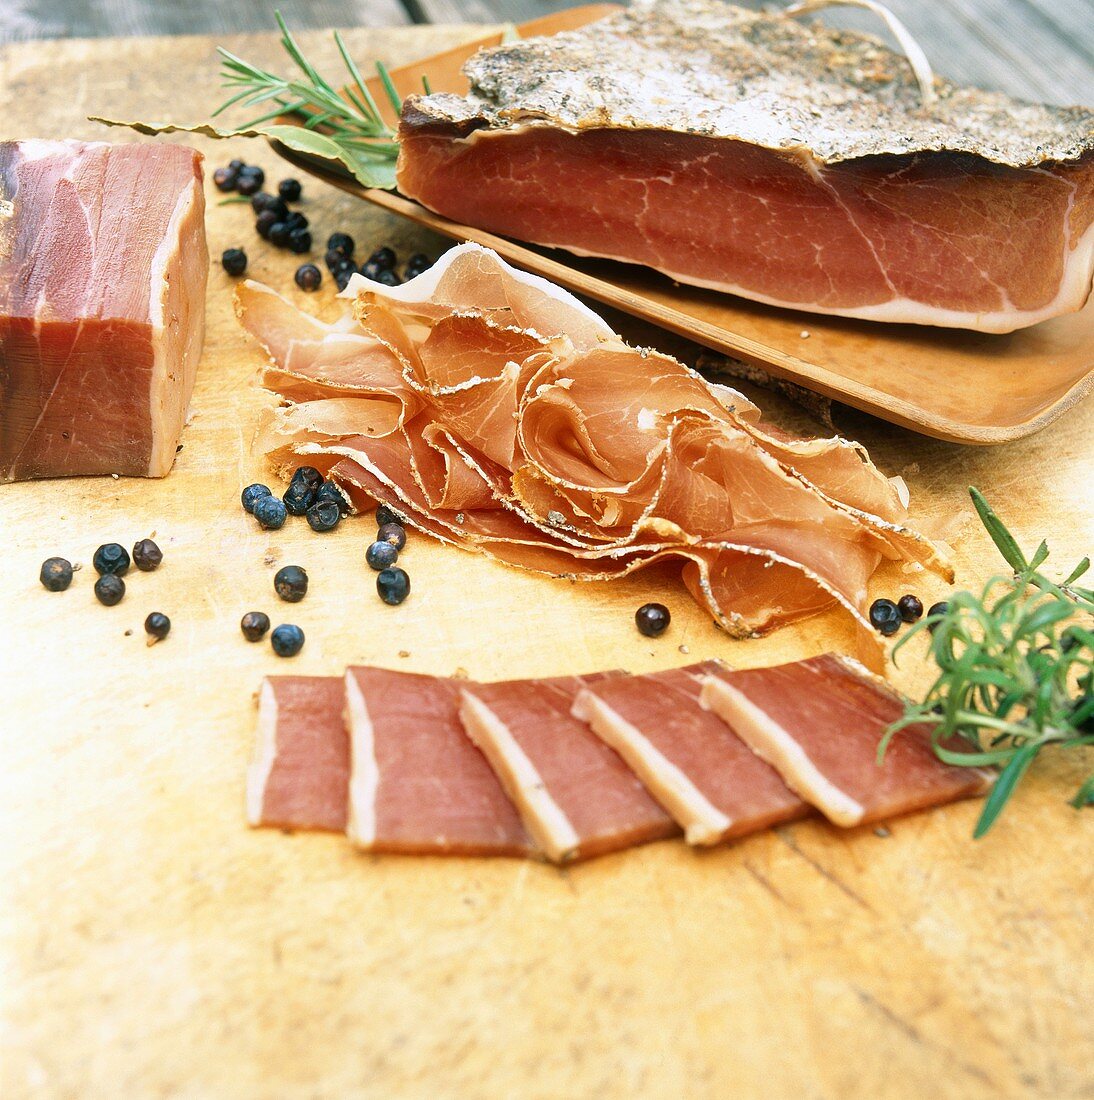 South Tyrolean Speck (bacon) with juniper berries & herbs